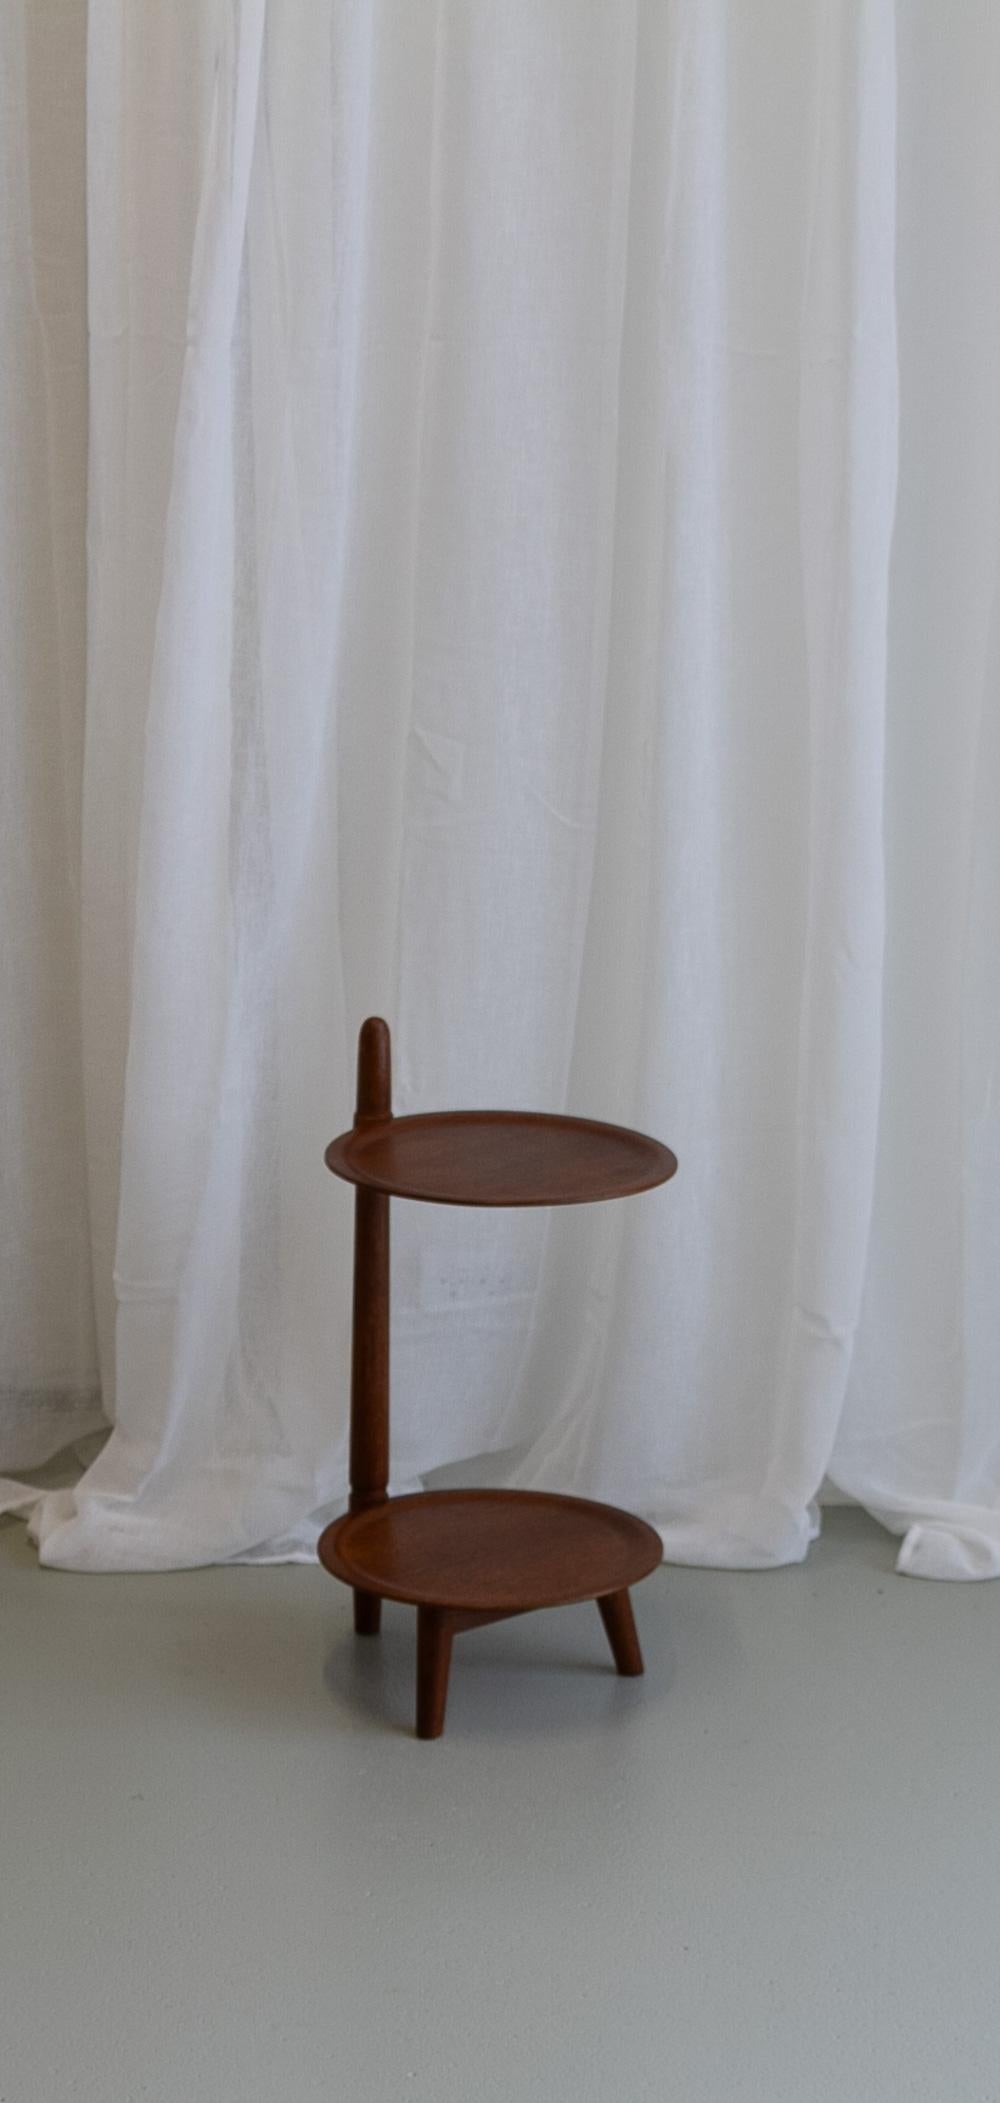 Danish Modern Teak and Oak Side Table by Edmund Jørgensen, 1950s.
Sculptural two tier side table with oak frame and round teak plywood tabletops.
Stable construction with three legs
Made at Edmund Jørgensens Møbelfabrik, Denmark in the 1950s.
Good